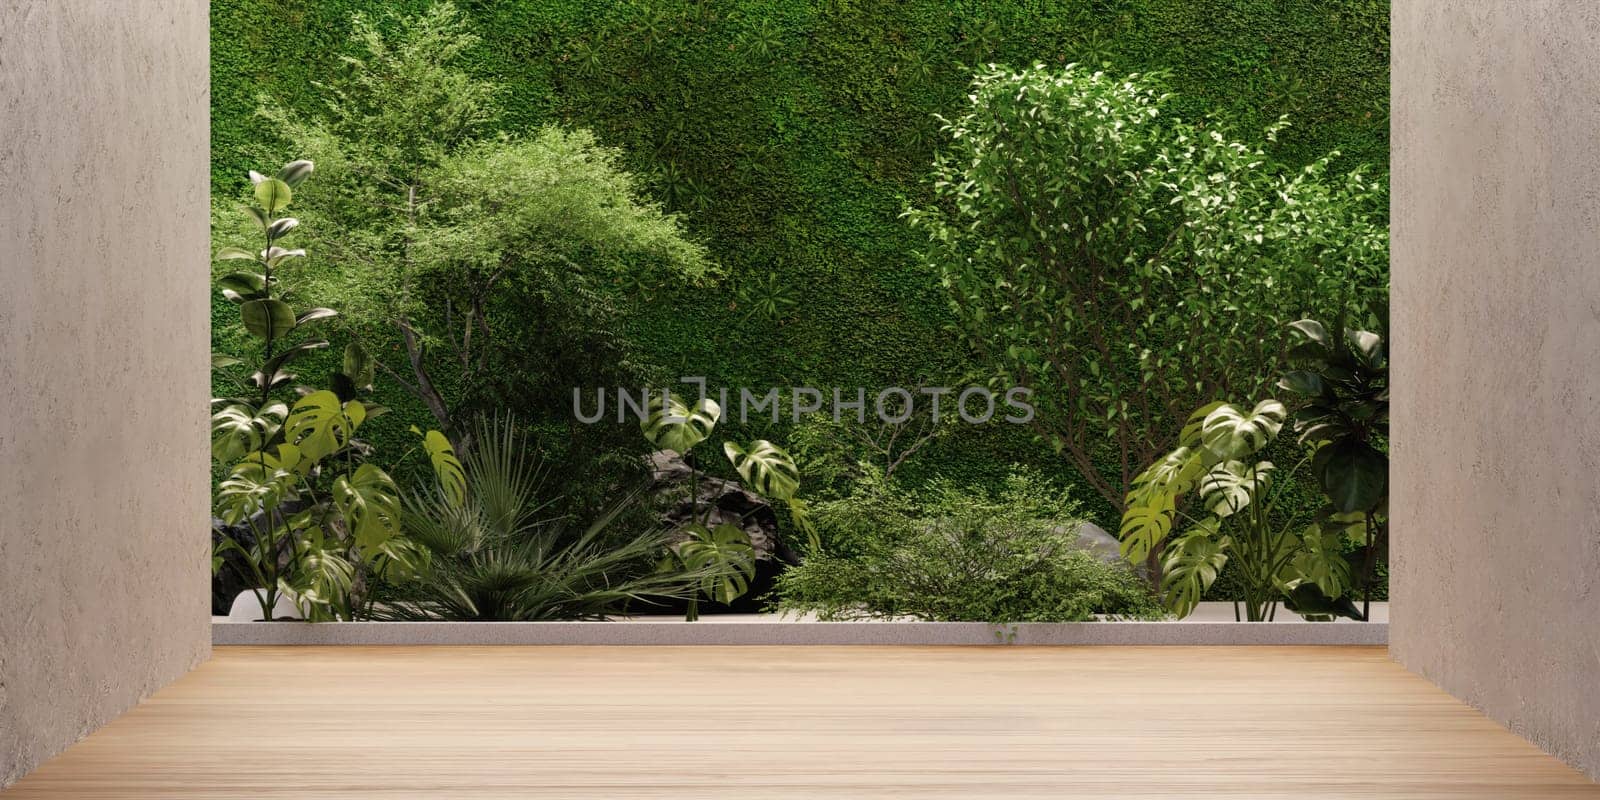 Empty glass room with tropical green plant wall background 3d render, There are wooden floor and concrete wall decorate by meepiangraphic